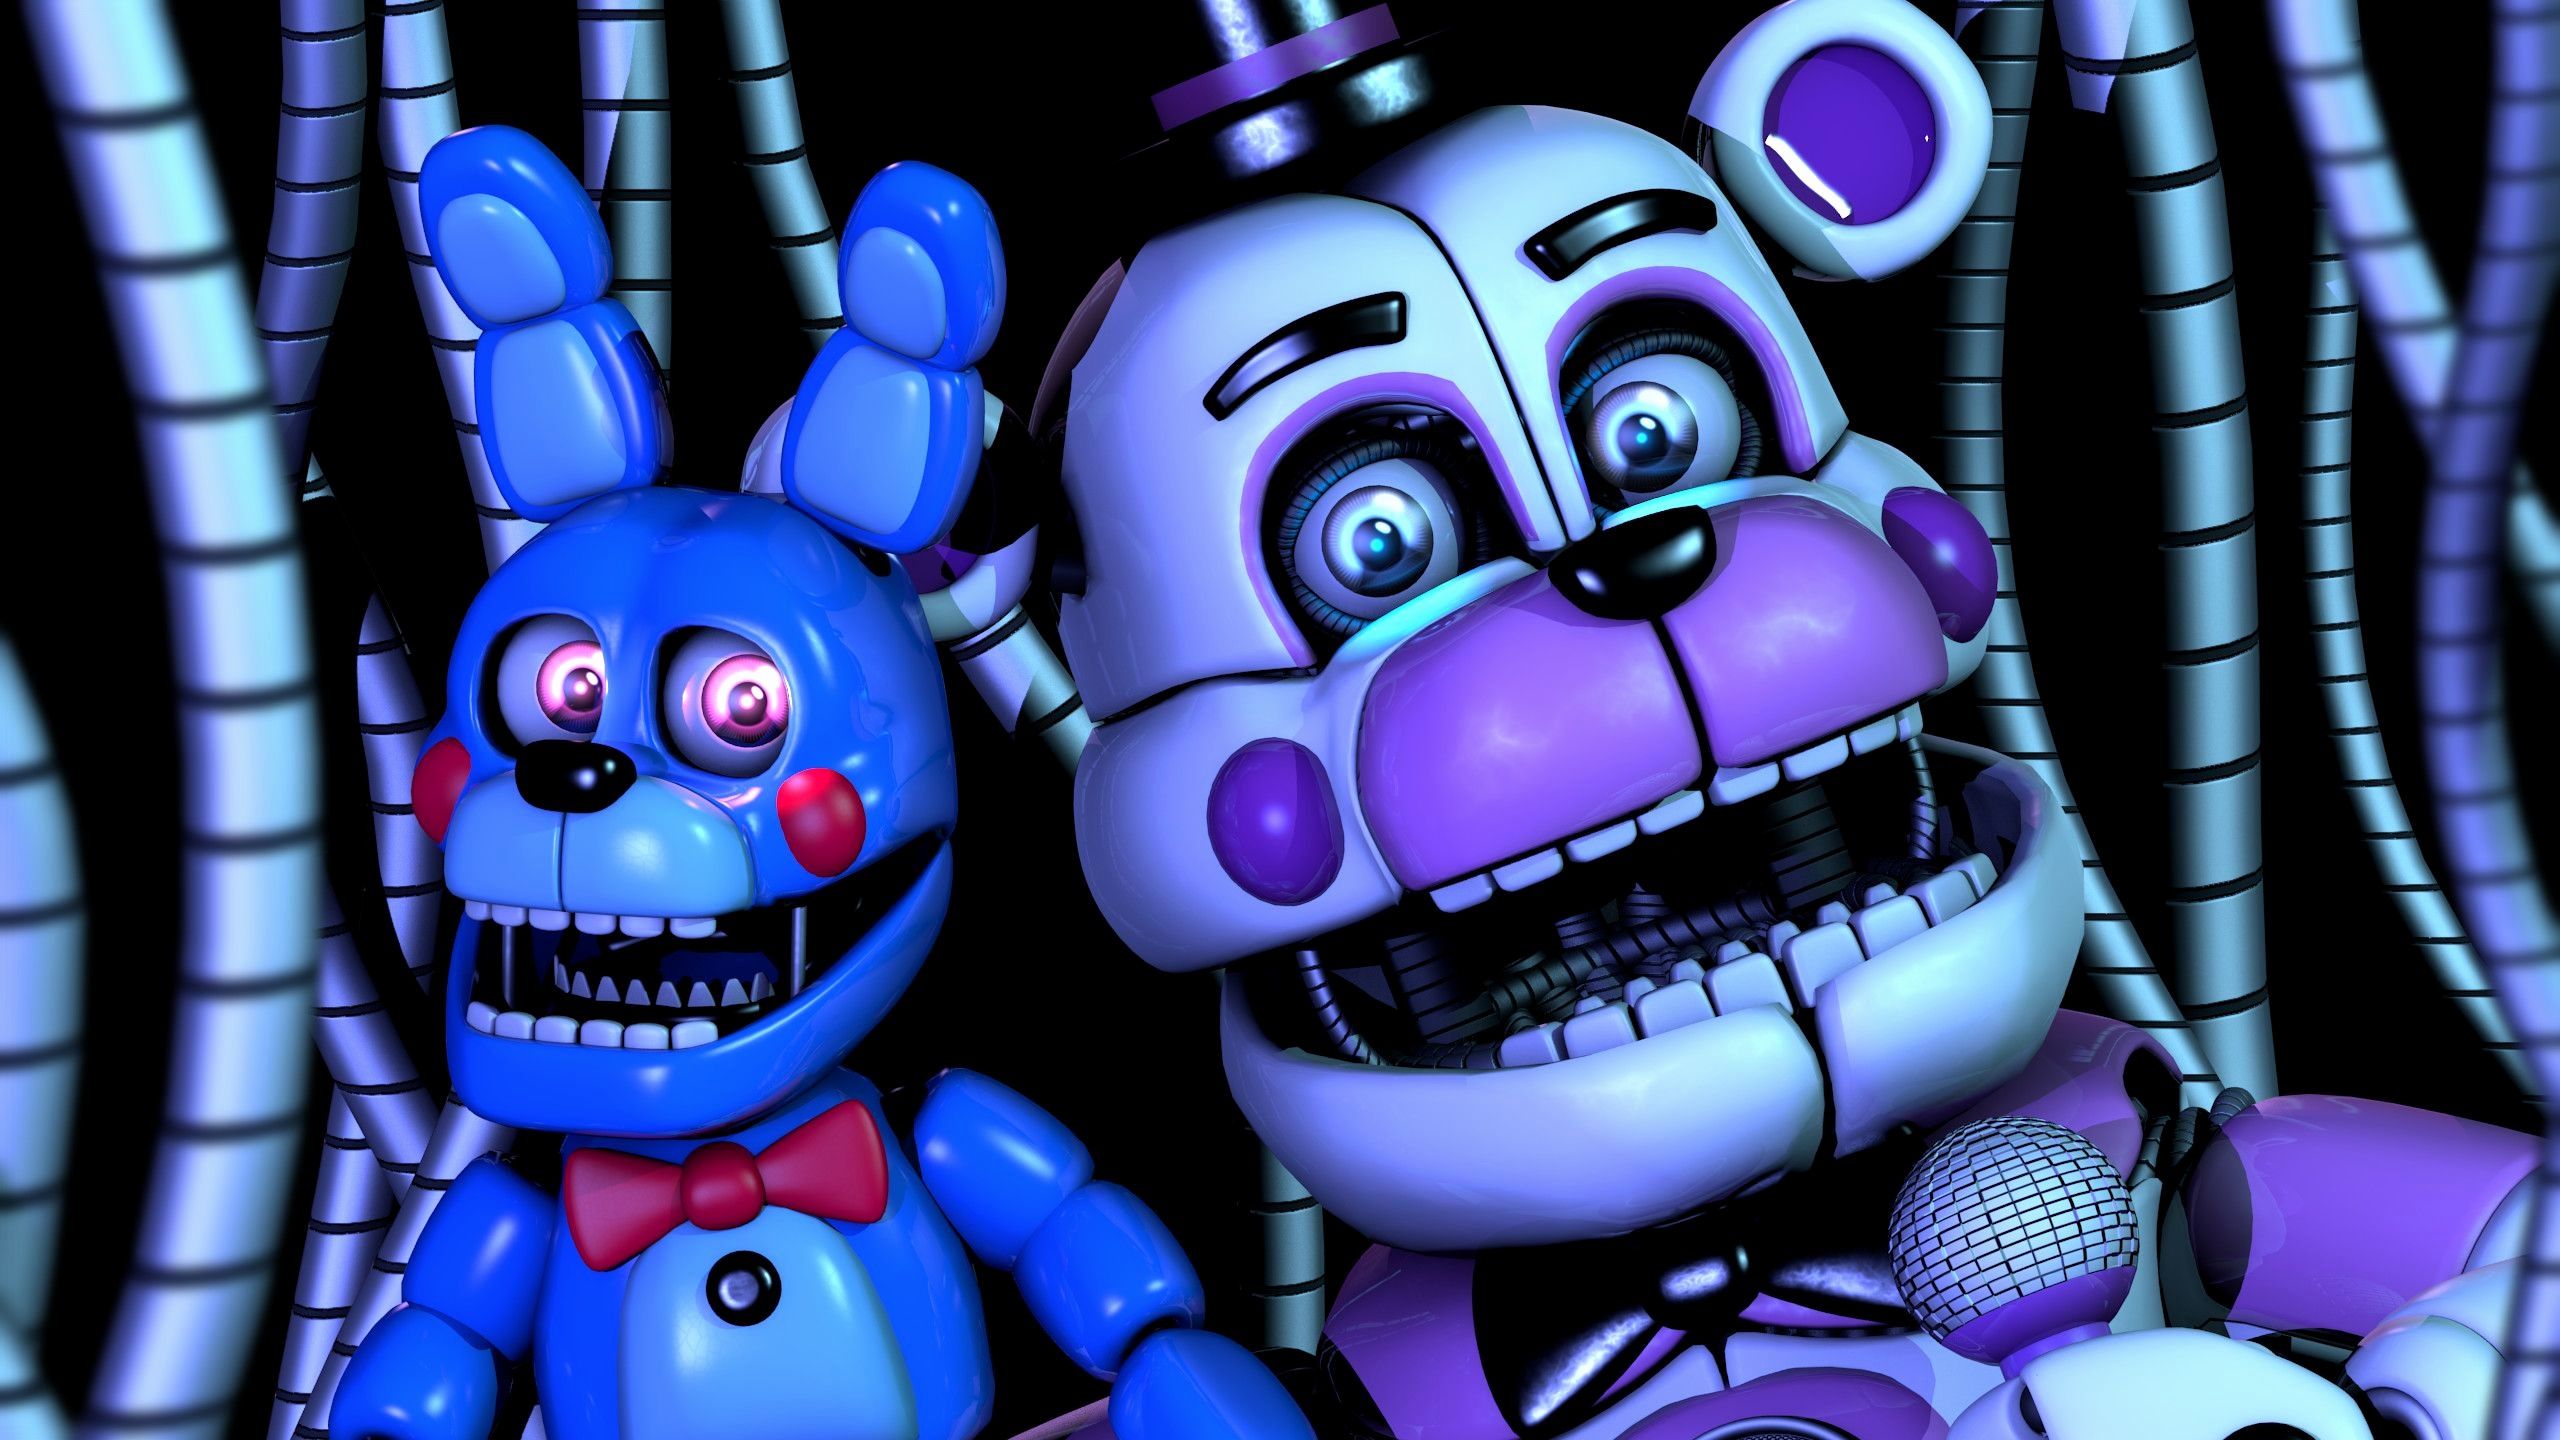 Five Nights at Freddys Wallpaper Inspirational Funtime Freddy Wallpaper 2019 of The Hudson